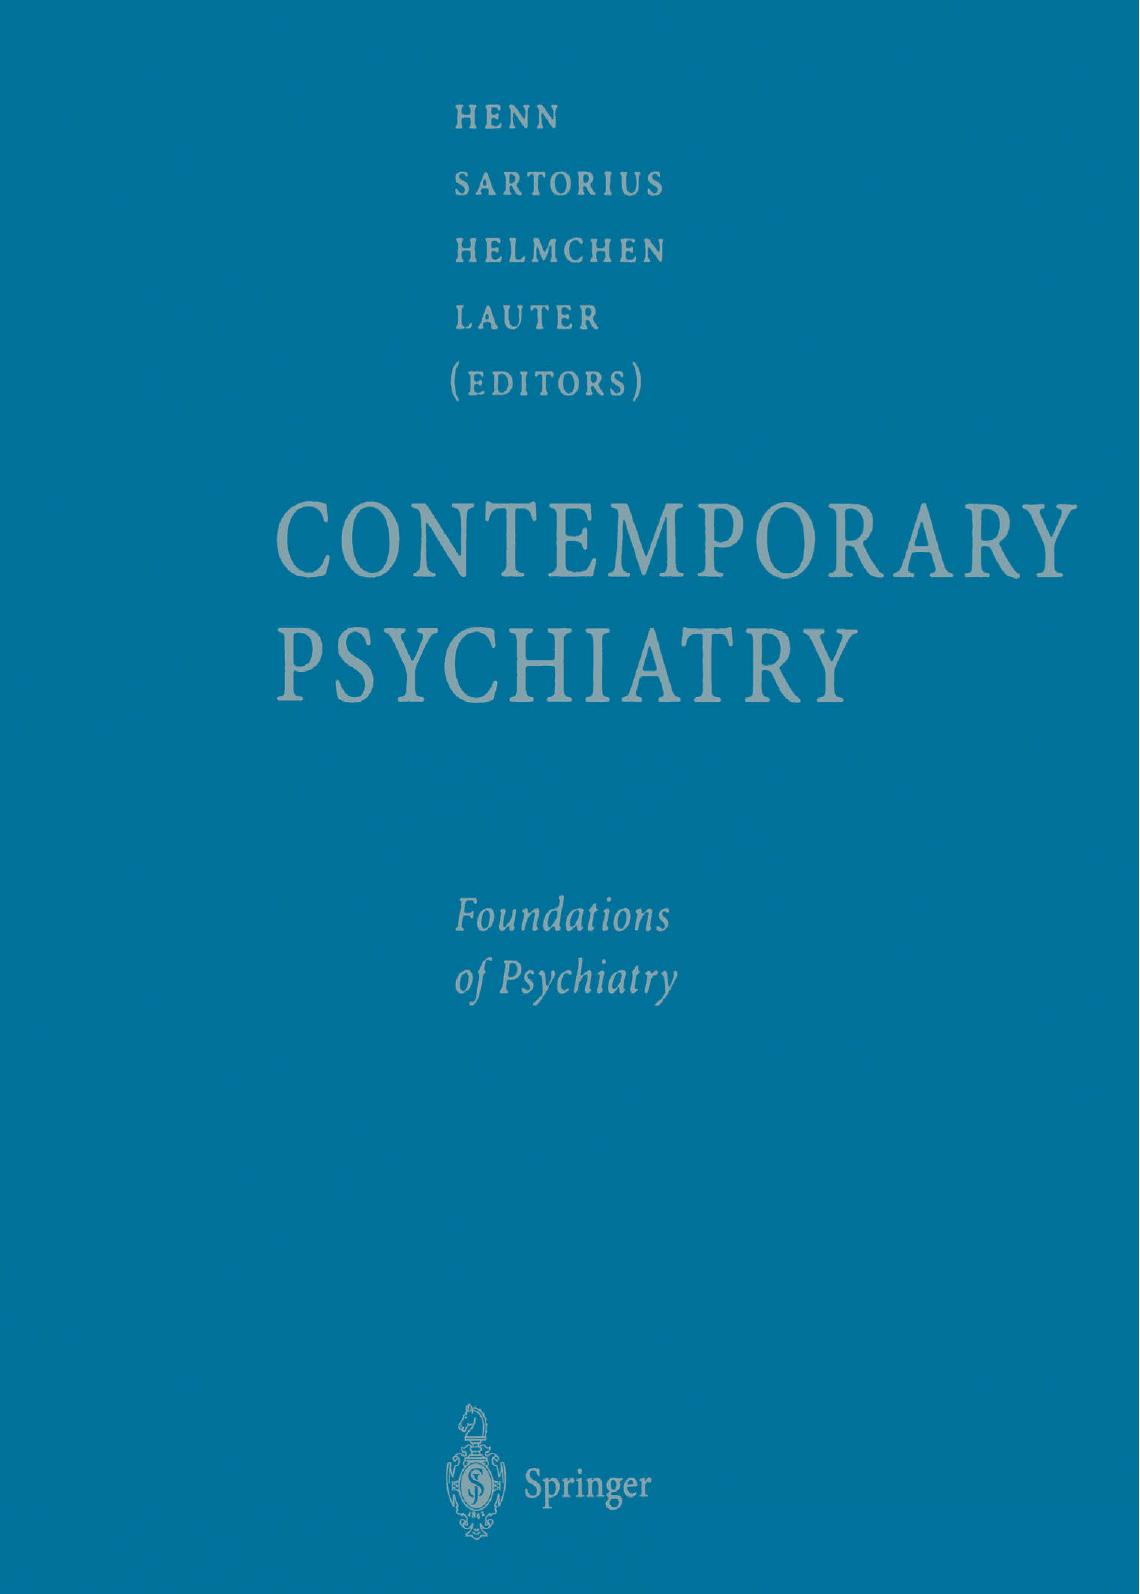 Contemporary Psychiatry  Vol 1 Foundations of Psychiatry, Vol 2 Psychiatry in Special Situations, Vol 3 Specific Psychiatric Disorders